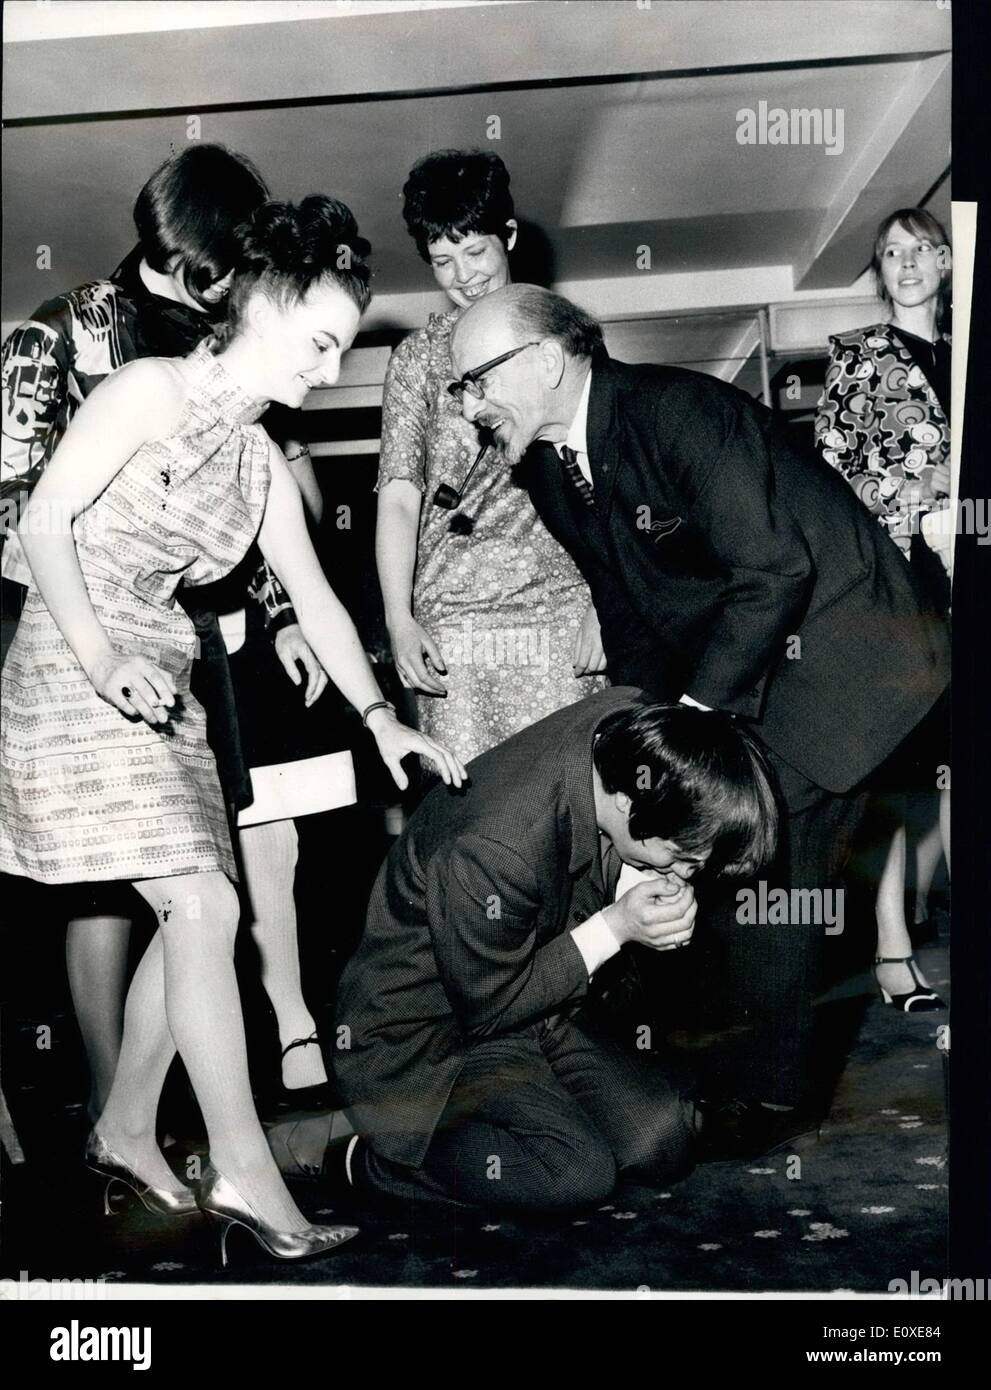 Jul. 07, 1966 - Young Fashion Designer Breaks Down And Weeps As He Is Chosen The Outright Winner of Cinzan Fabric Compet: Today was the turning point in the life of a young fabric and fashion designer, 22-year-old Mr. Cameron Robert Scott, from Kintore, near, Aberdeen. He was chosen as the outright winner in the Count Cinzane Frabic into Fashion Foundation Competition from 21 area finalists gathered at the Savoy Hotel today. There were some 1,075 entries. As the outright winner, Mr Stock Photo